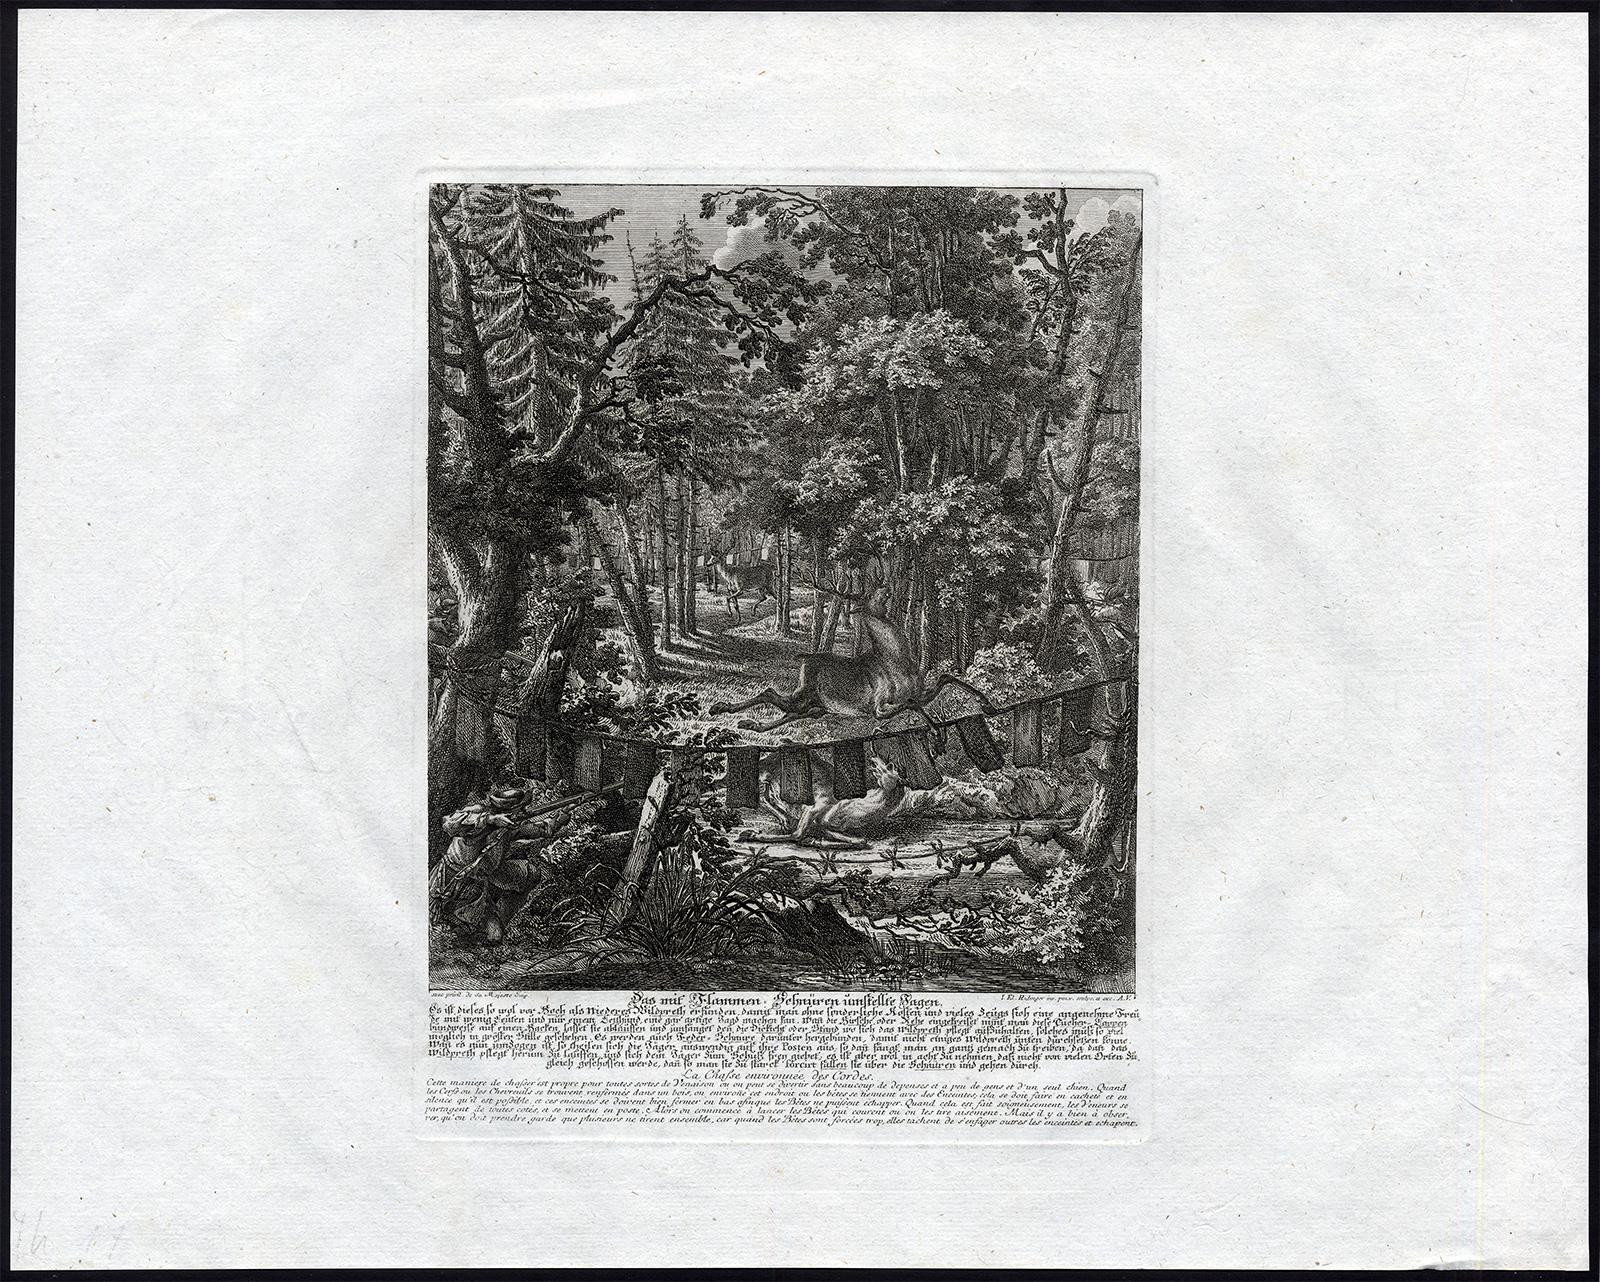 Antique hunting scene print with a deer trap by Ridinger - Engraving - 18th c - Print by Martin Elias Ridinger